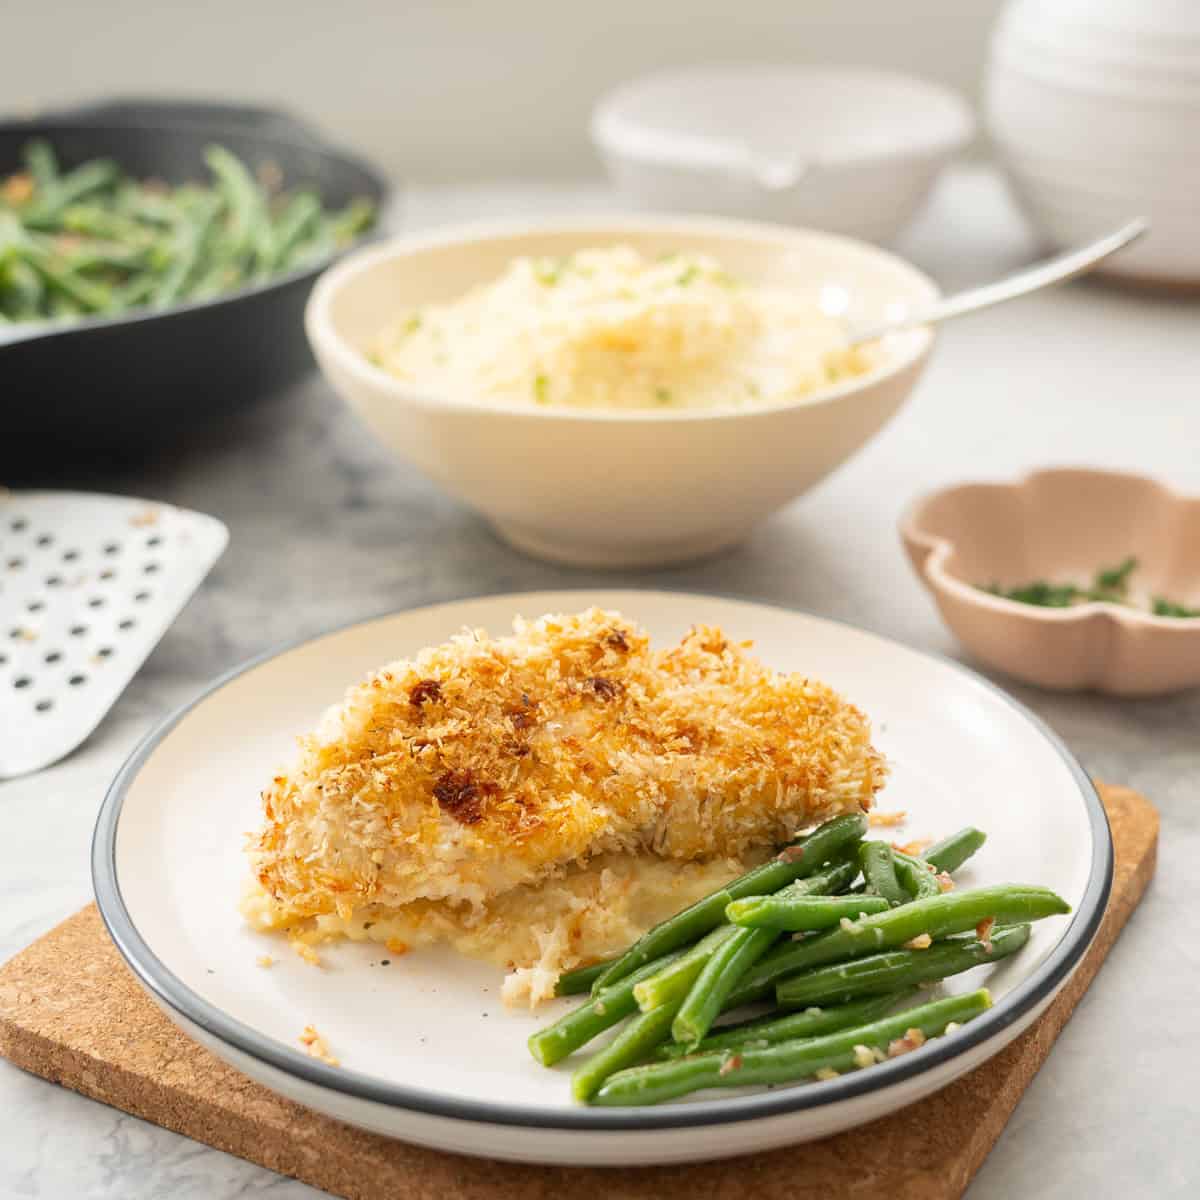 A dinner plate with green beans to the front and a crumbed chicken cutlet resting on mashed potato with a bowl of mashed potato in the background